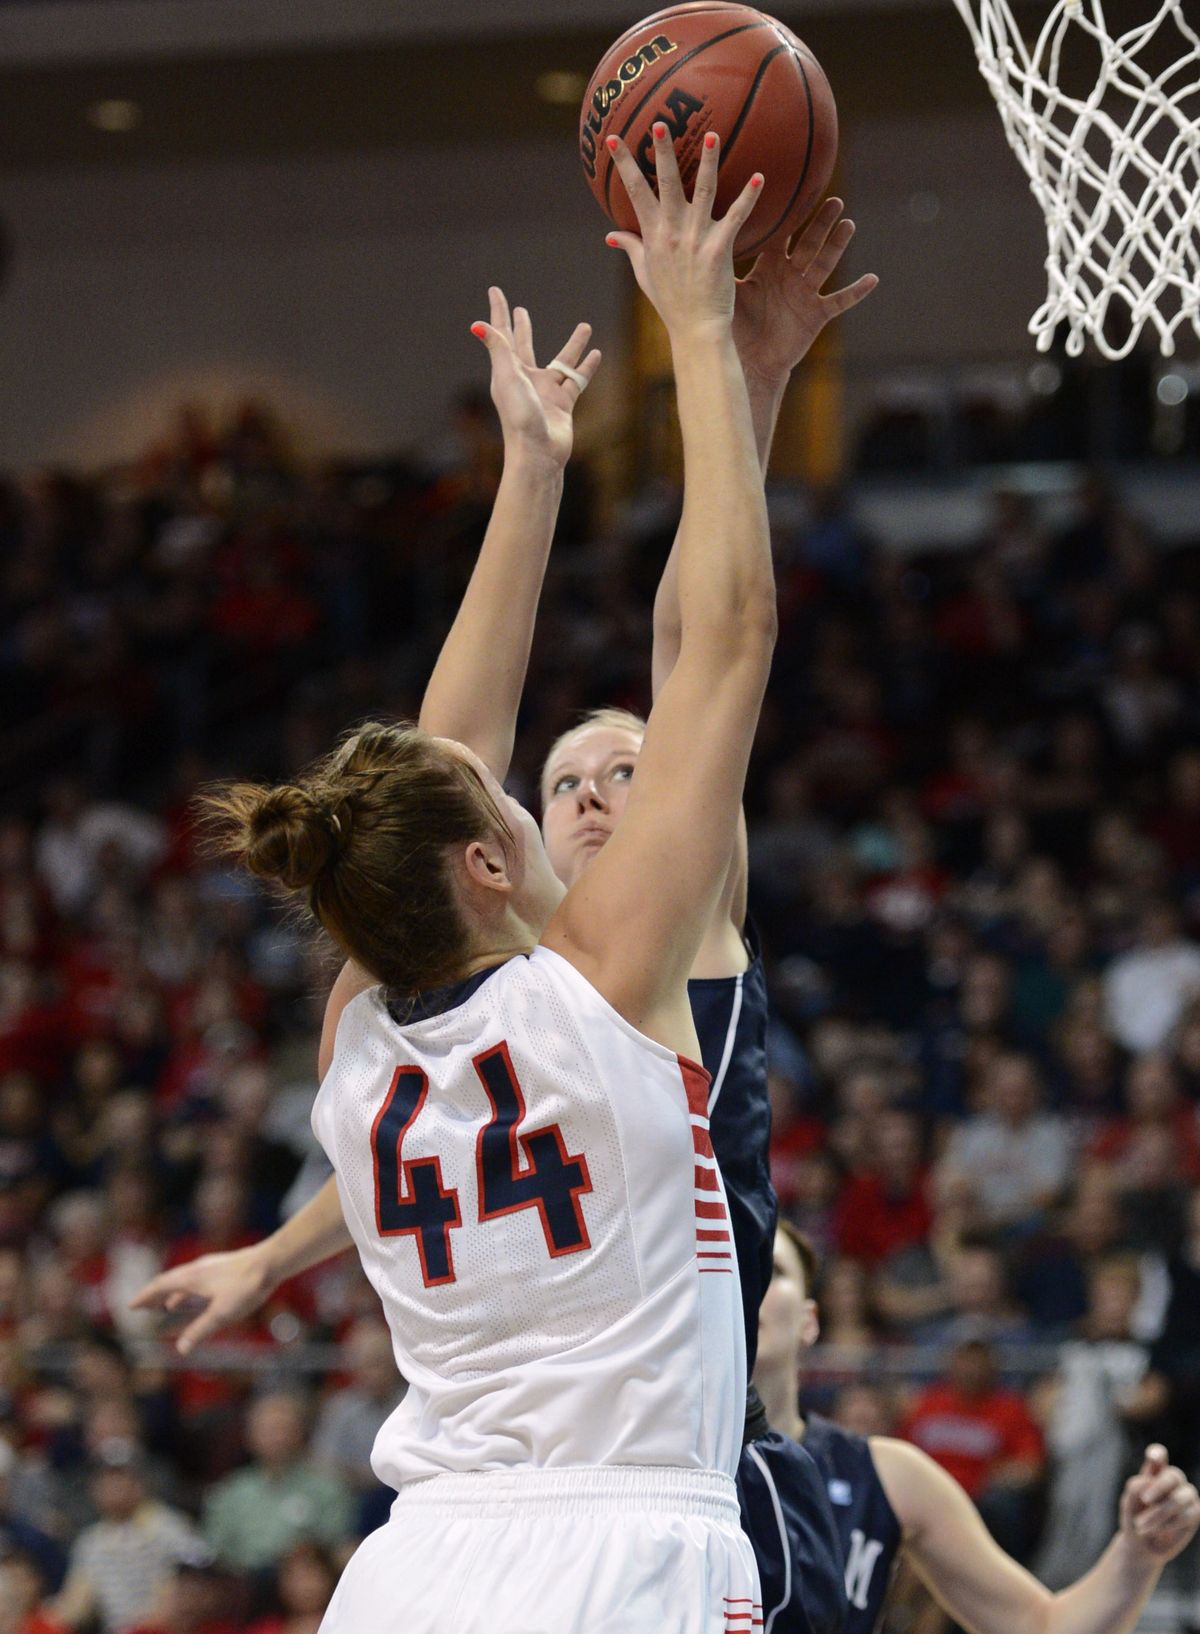 GU’s Shelby Cheslek (44) scores on her way to tying her season high of 16 points. (Colin Mulvany)